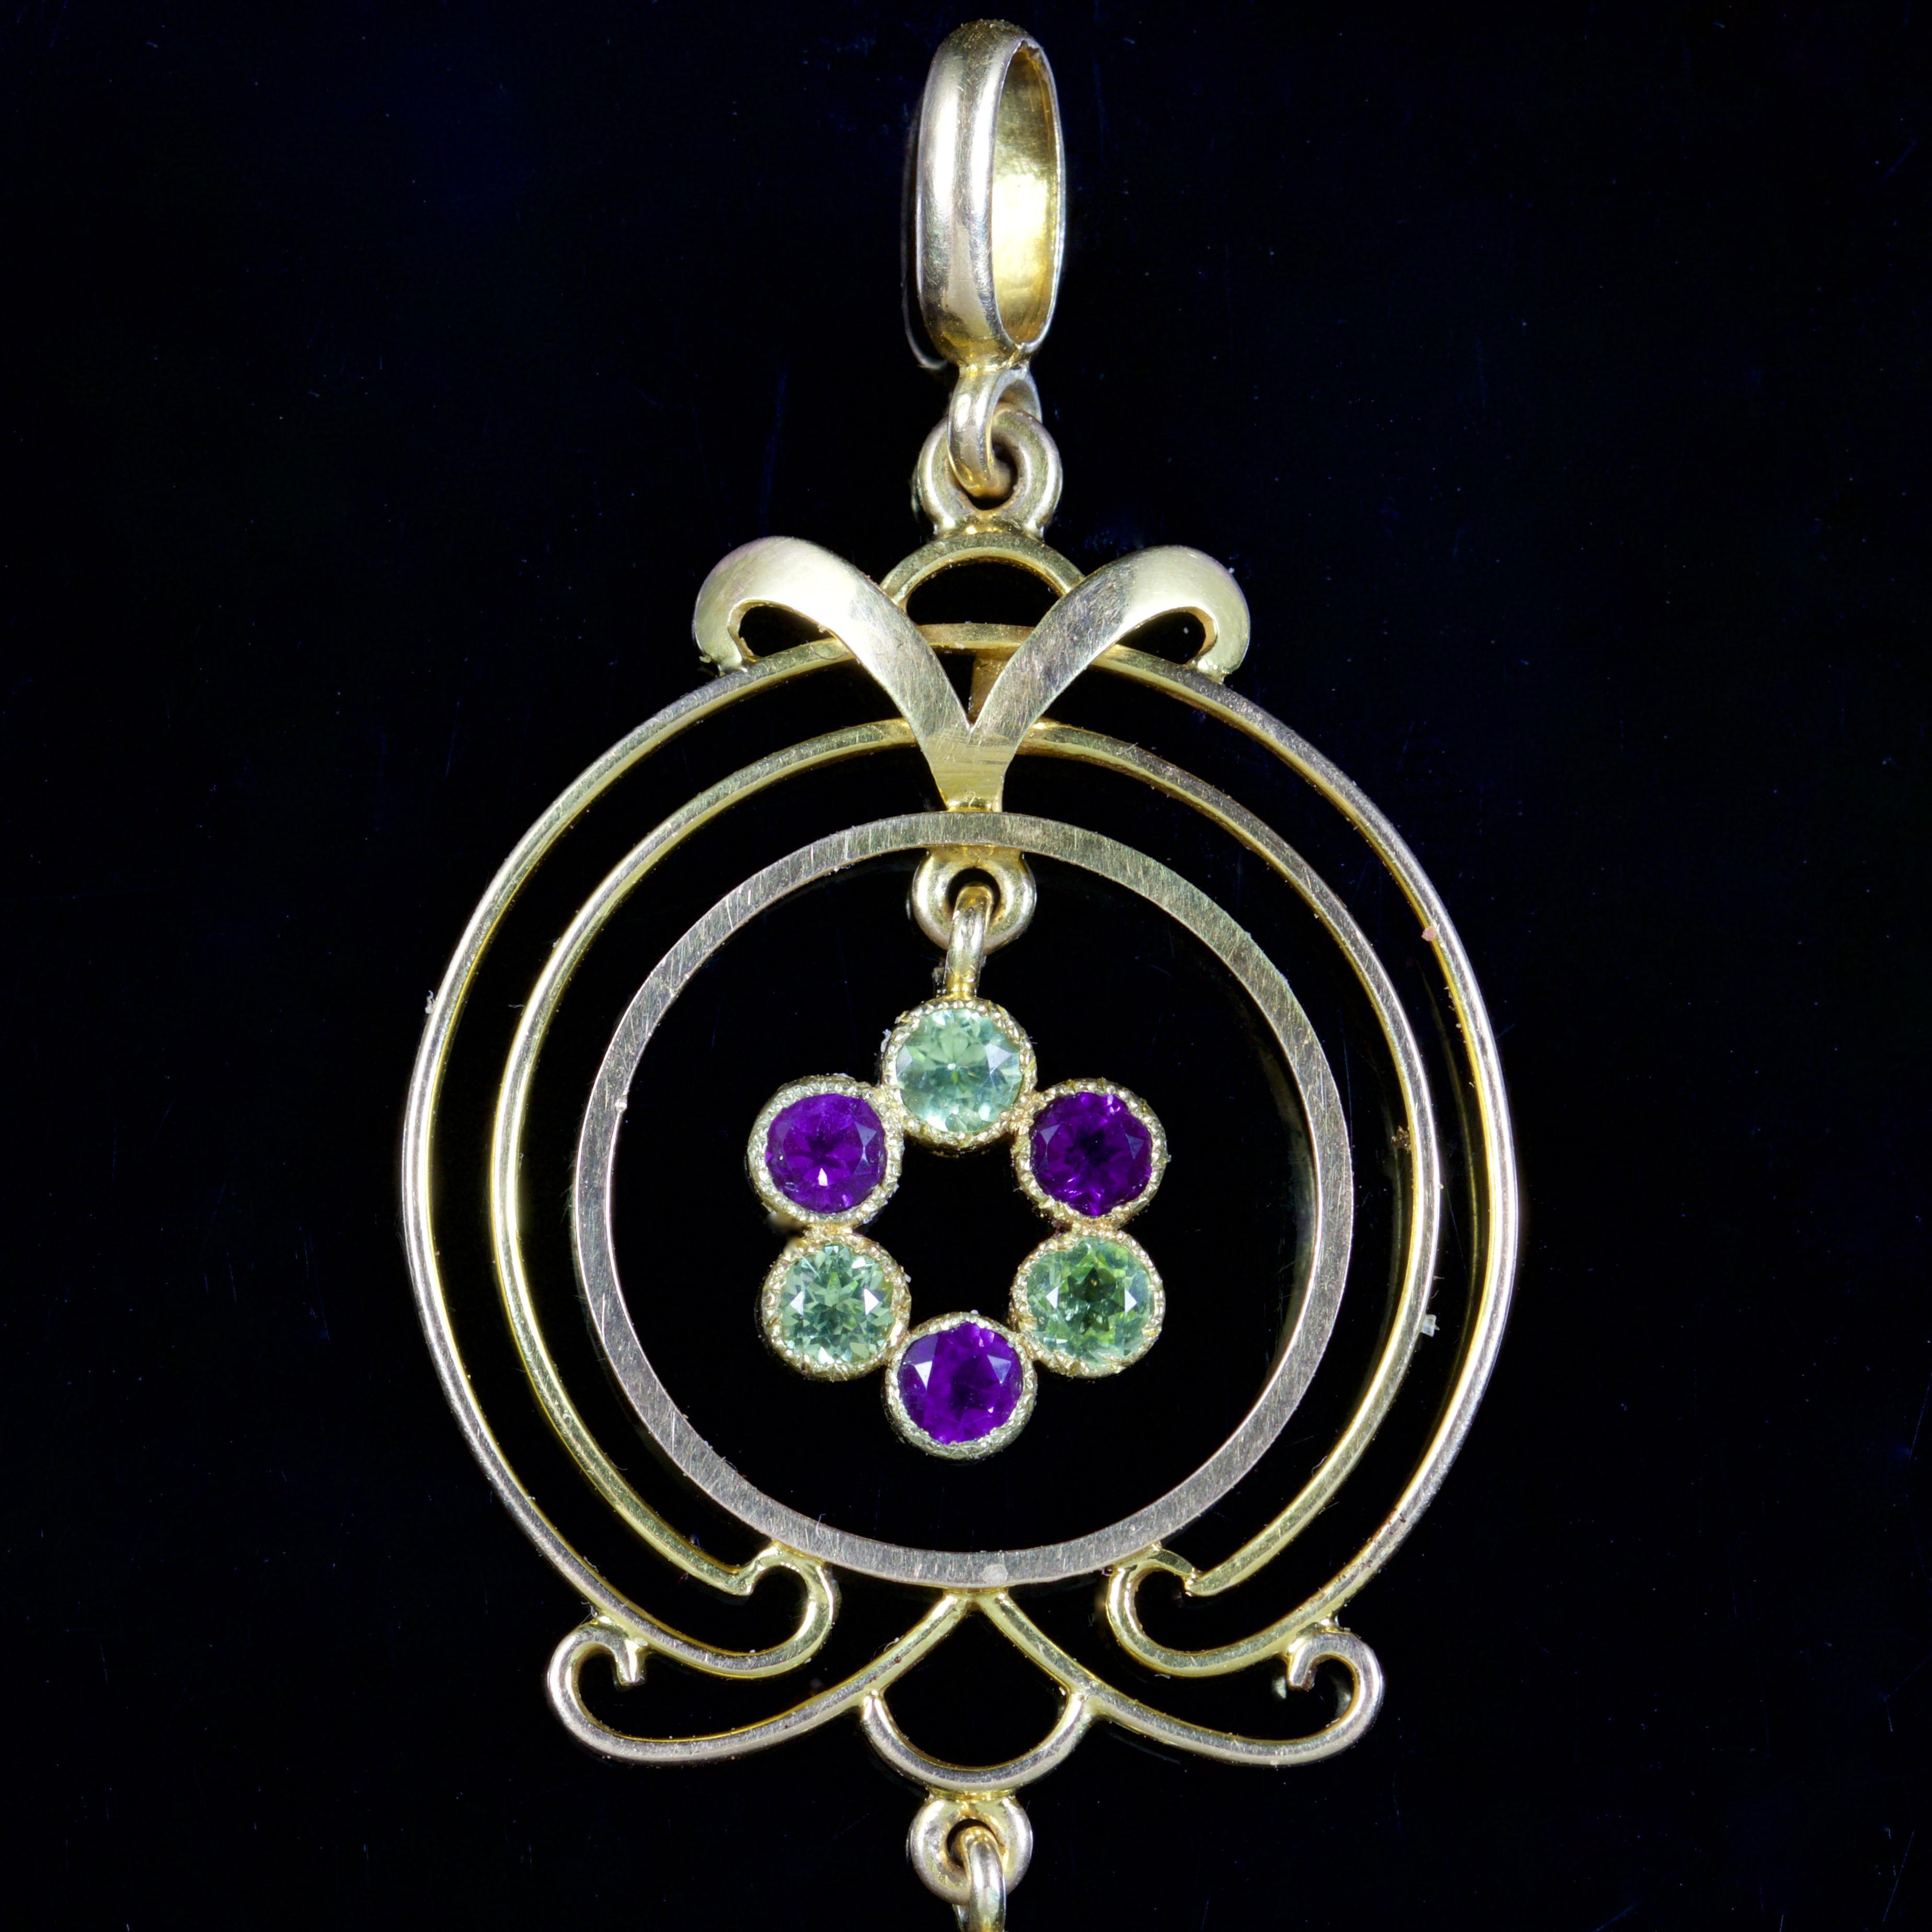 This beautiful Victorian Suffragette pendant is set in 15ct Gold, Circa 1900.

The pendant boasts a wonderful design, a cluster of Amethyst’s and Peridots hang freely in the 15ct Gold gallery.

A Pearl and Amethyst can be seen on the dropper